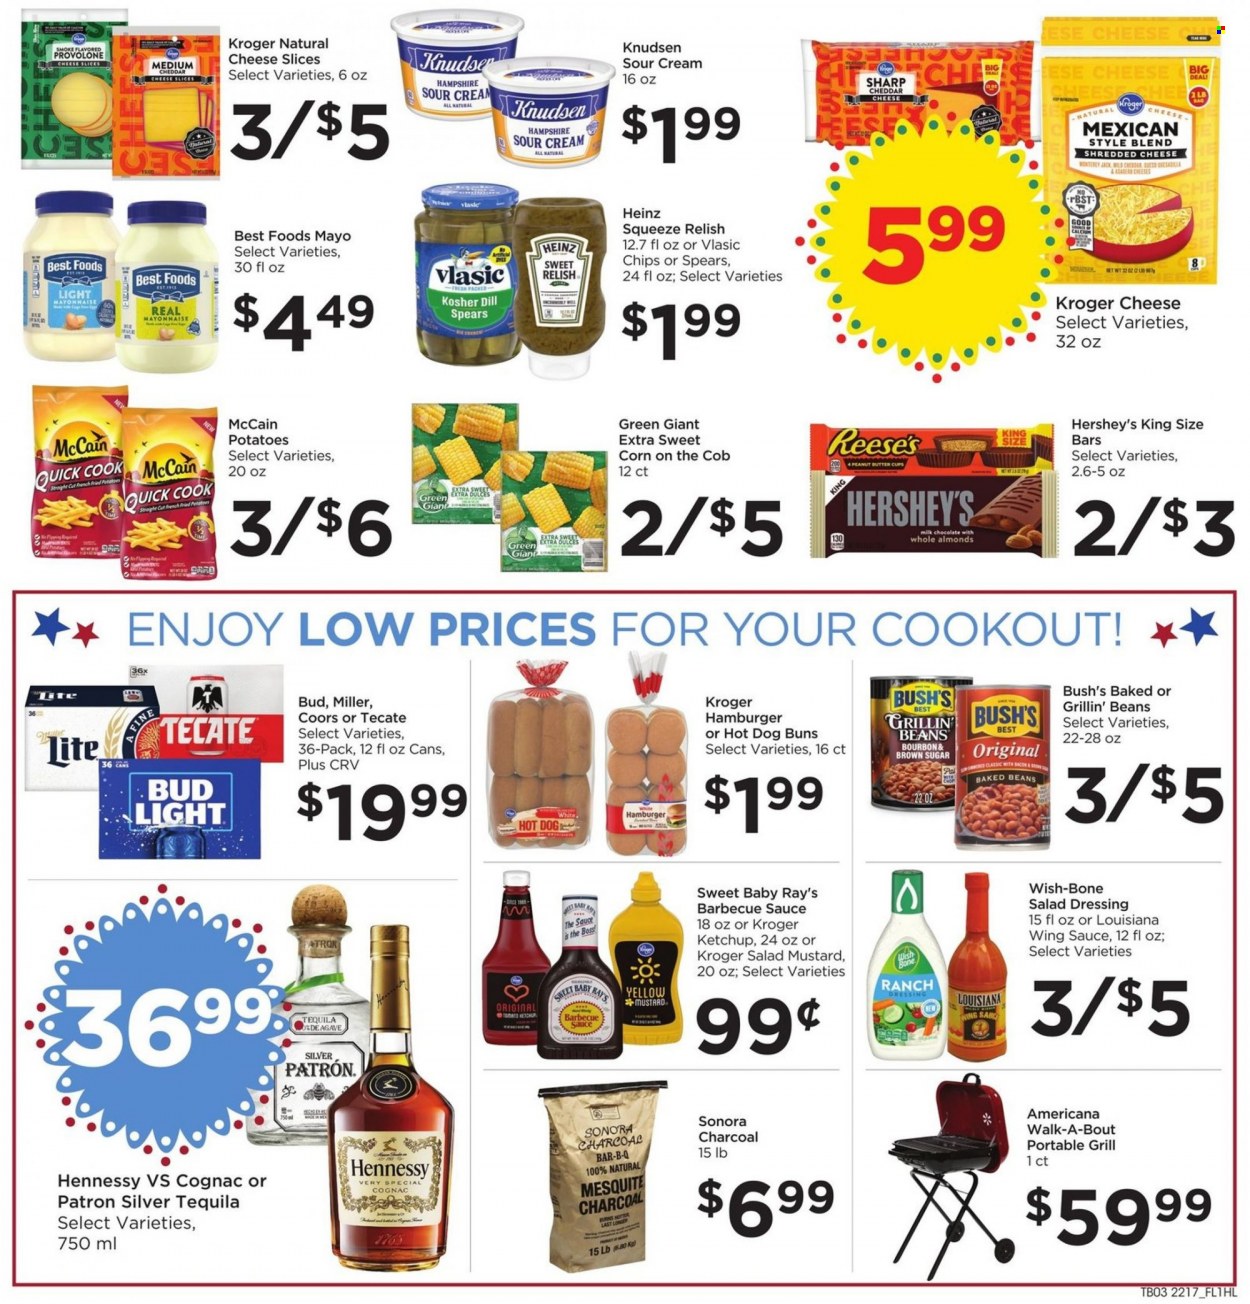 thumbnail - Food 4 Less Flyer - 05/25/2022 - 05/31/2022 - Sales products - buns, beans, corn, potatoes, sweet corn, hamburger, Monterey Jack cheese, shredded cheese, sliced cheese, Provolone, sour cream, mayonnaise, ranch dressing, Reese's, Hershey's, McCain, milk chocolate, chocolate, peanut butter cups, chips, cane sugar, Heinz, baked beans, dill, BBQ sauce, mustard, salad dressing, ketchup, dressing, wing sauce, almonds, bourbon, cognac, tequila, Hennessy, beer, Bud Light, Miller, grill, Coors. Page 4.